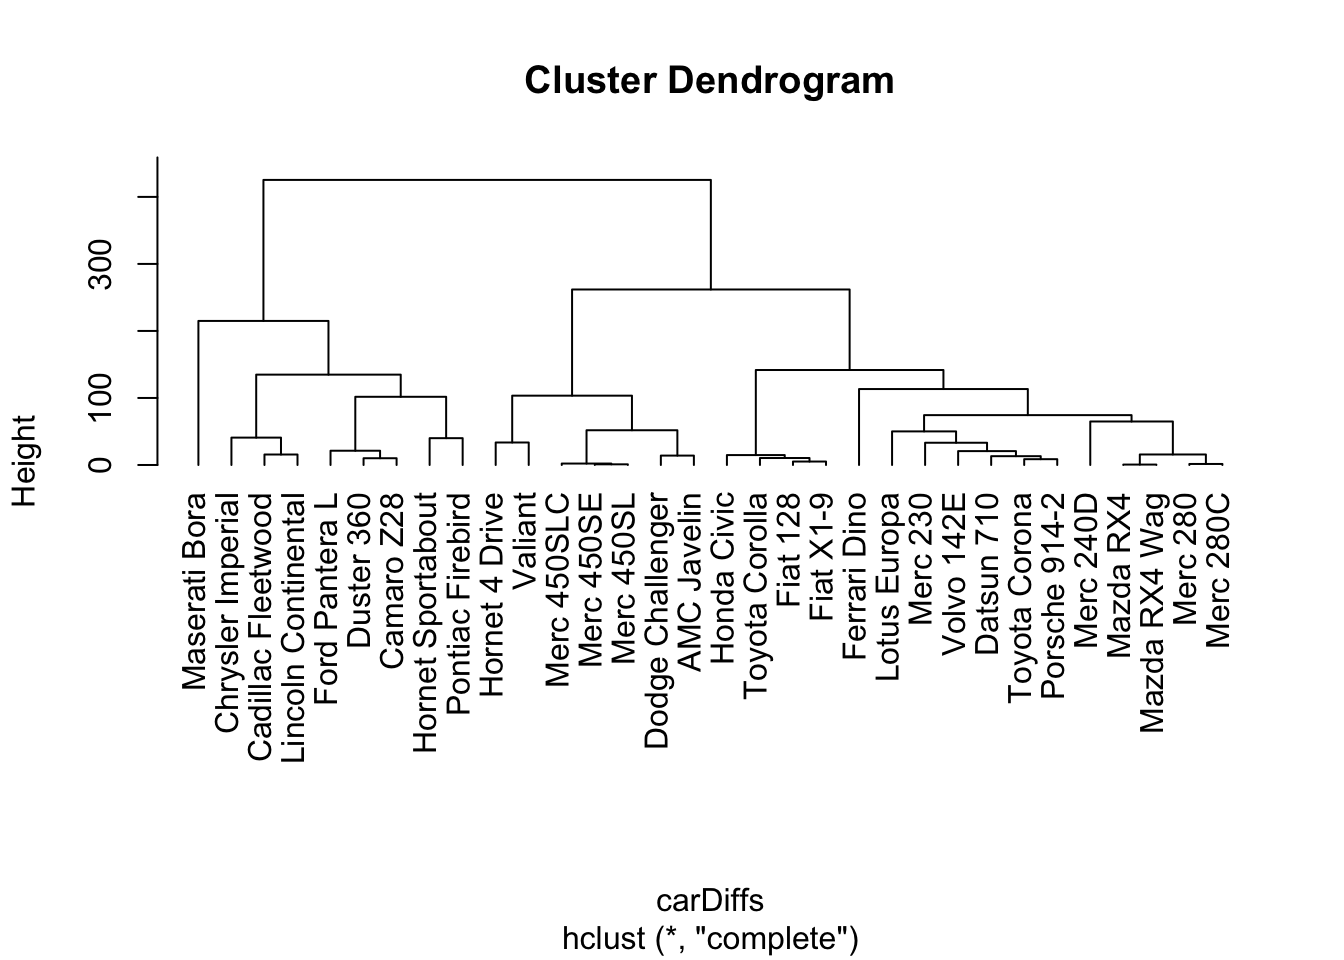 The dendrogram constructed by hierarchical clustering from car-to-car distances implied by the mtcars data table.